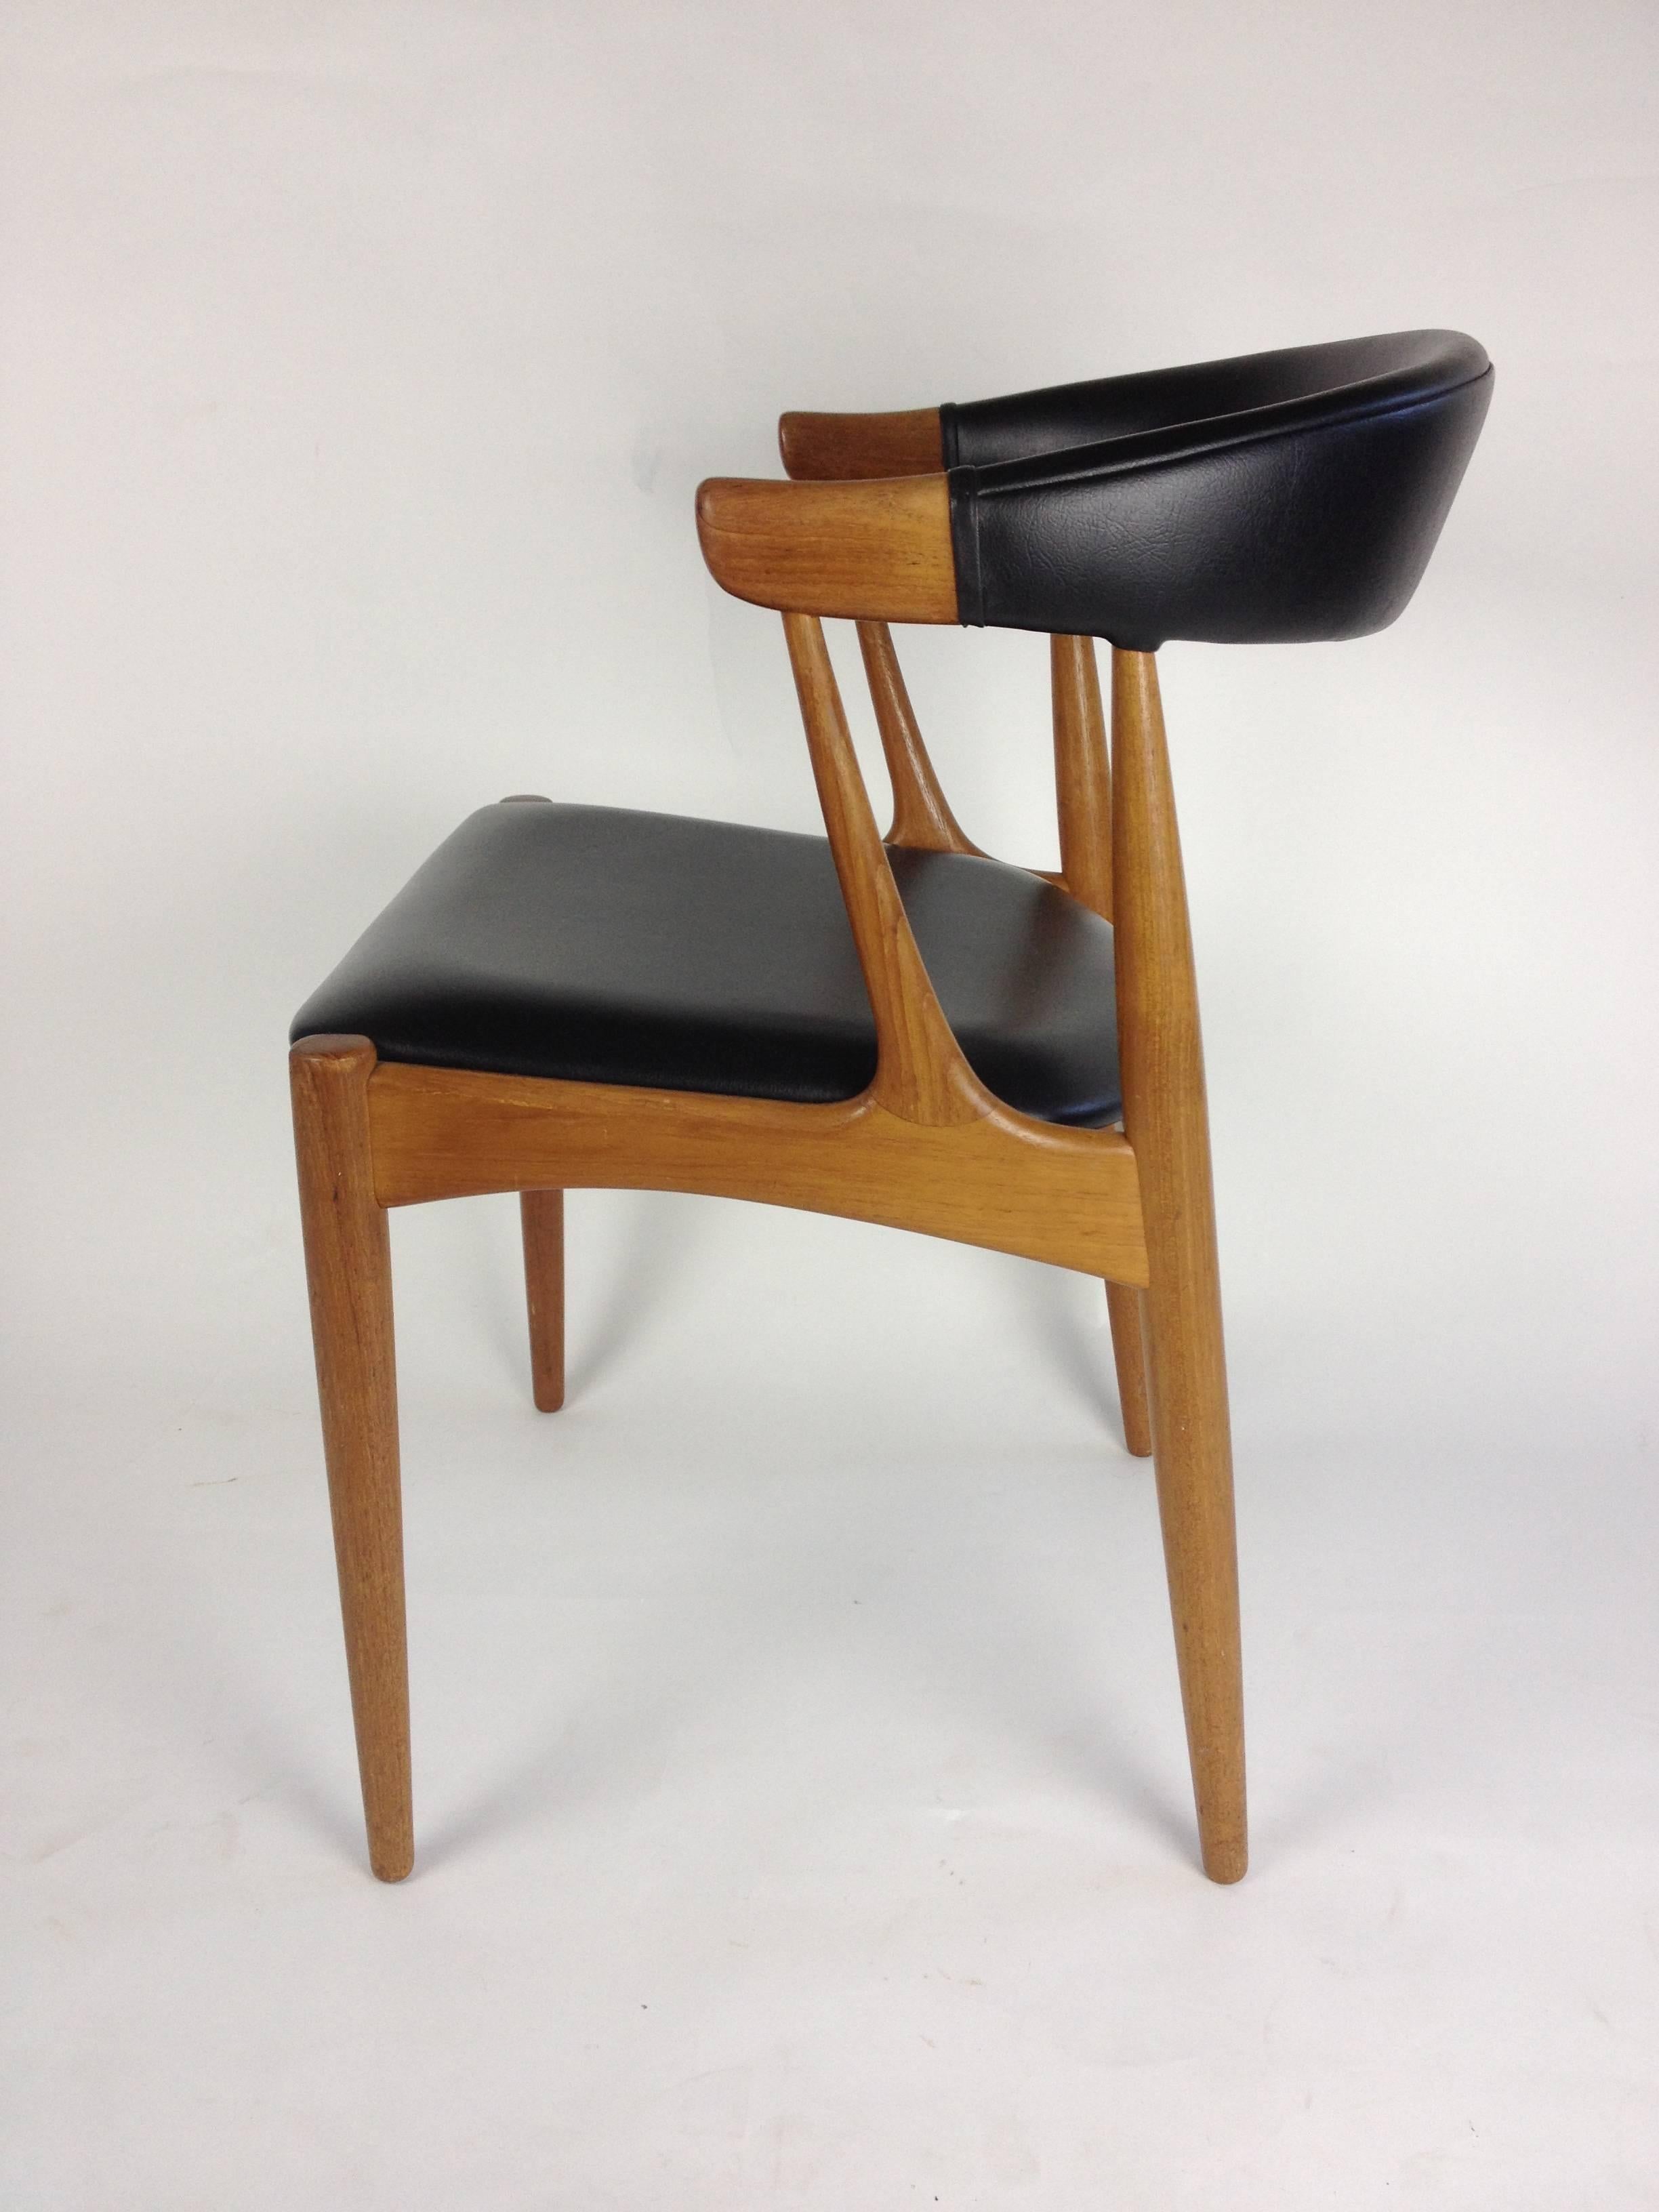 Gorgeous original 1960s teak dining or occasional chair - designed by Johannes Andersen for Brdr. Andersen. Made in Denmark - very good vintage condition. Incredible craftsmanship and design. If you are looking for a matched pair of this incredible